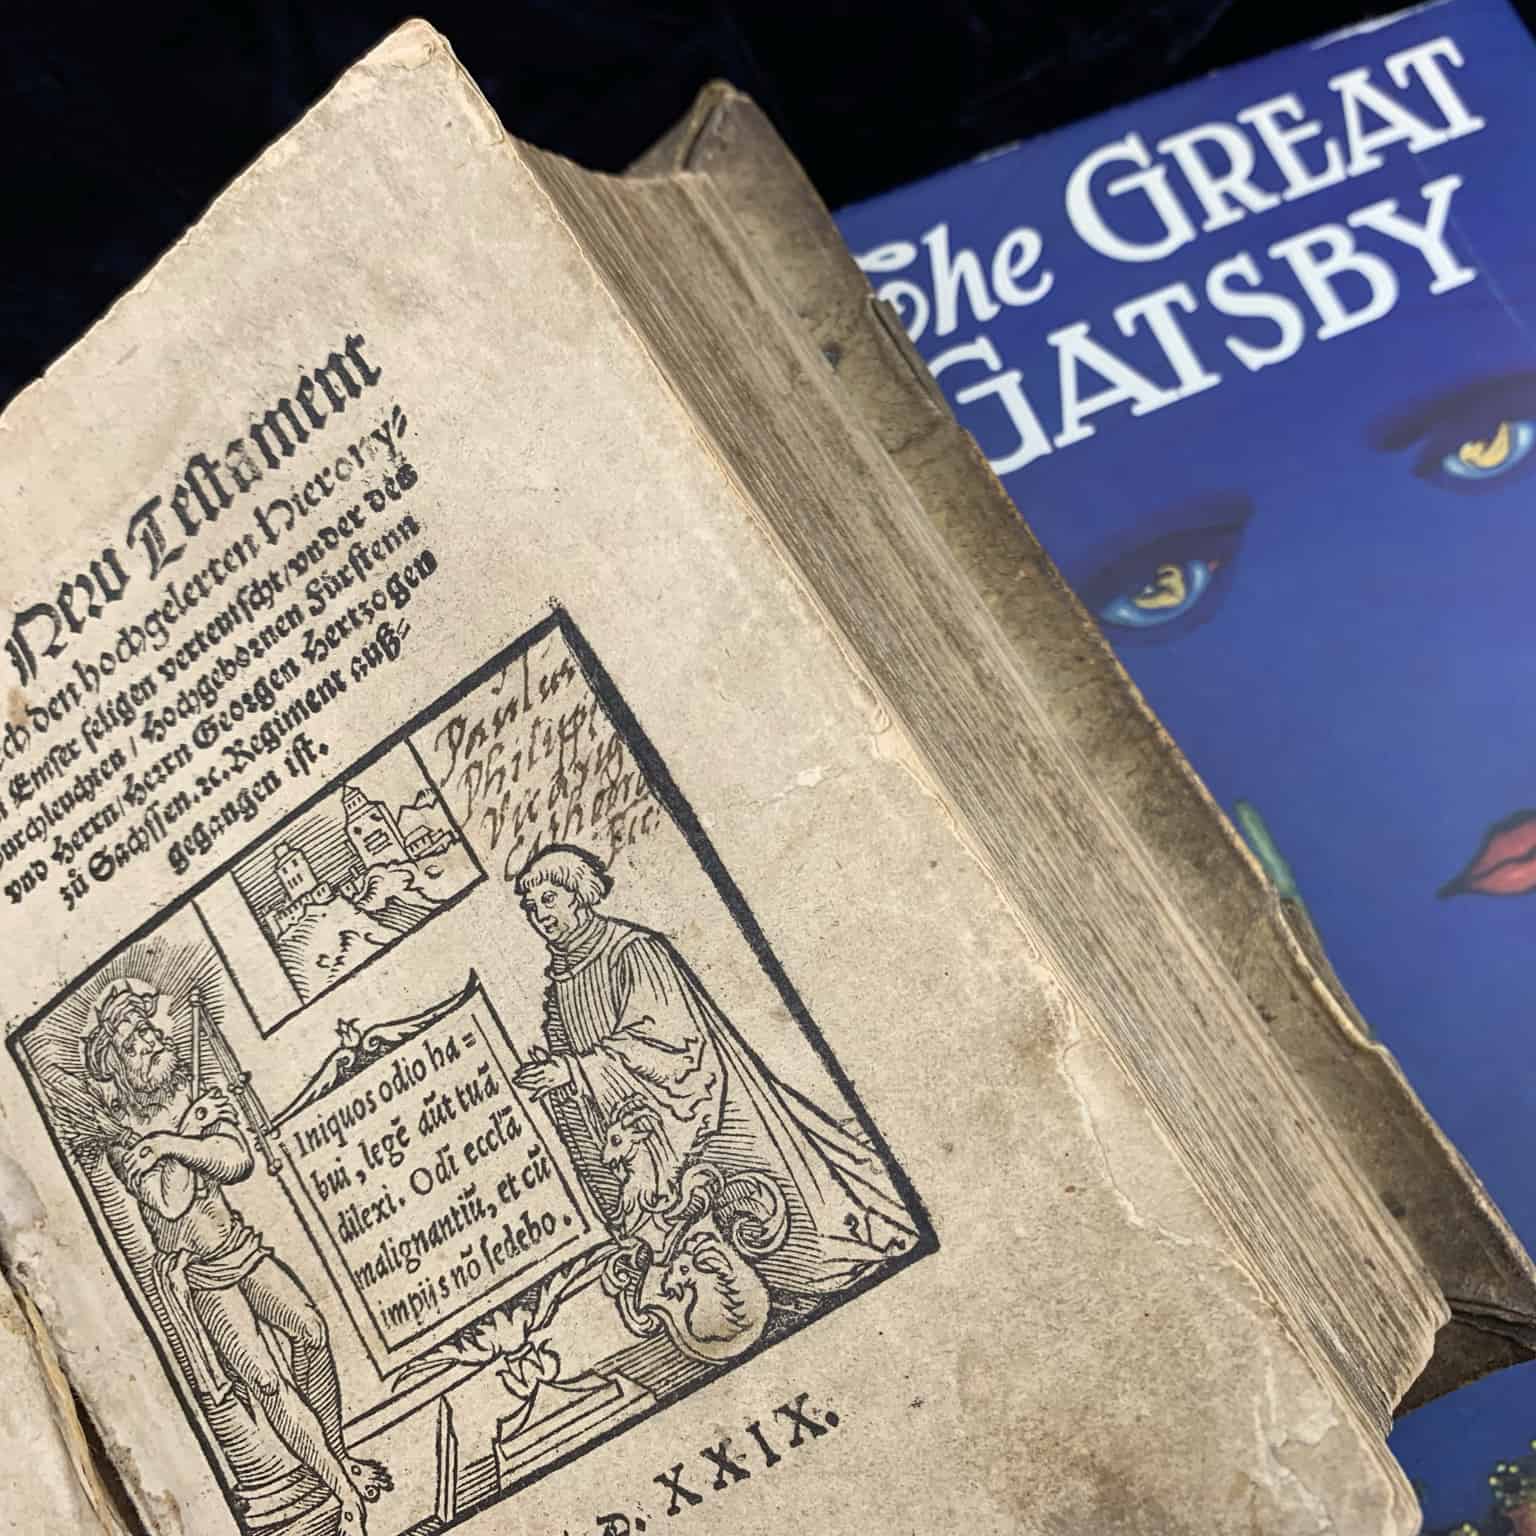 Two books are next to each other. One is a medieval text and another is a copy of The Great Gatsby.